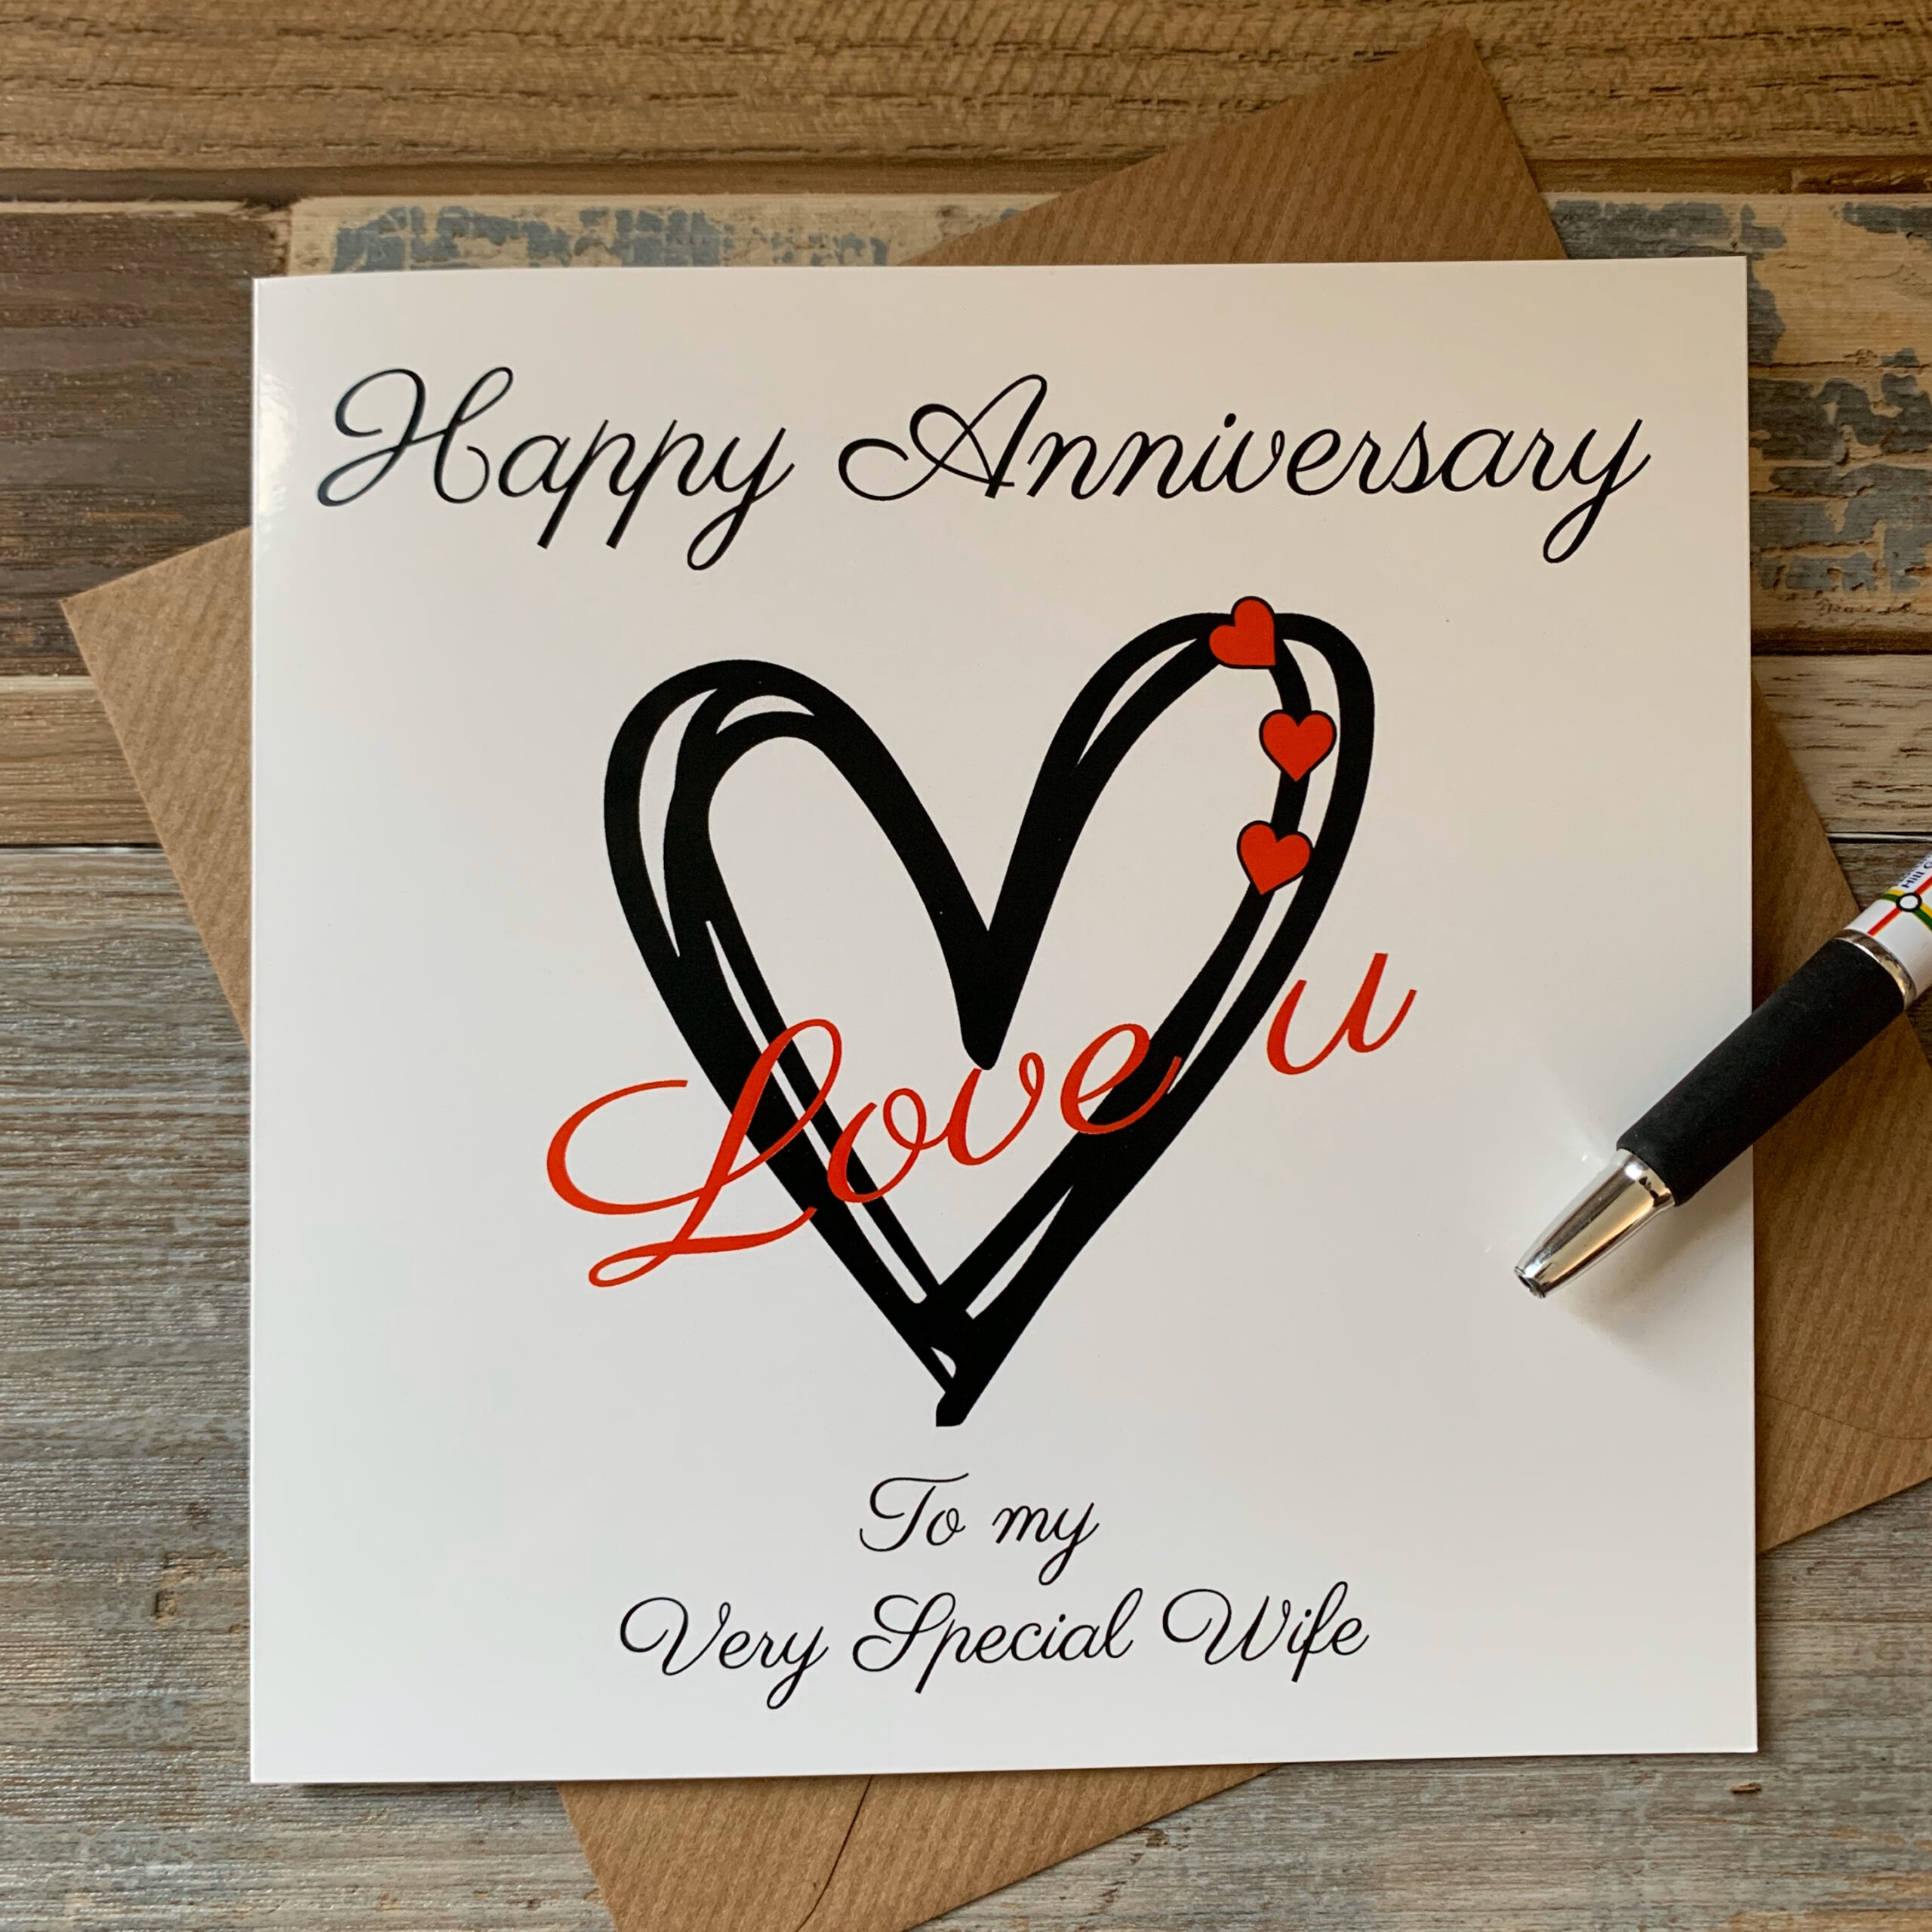 Happy Anniversary Card - Love u Heart To A Special Wife